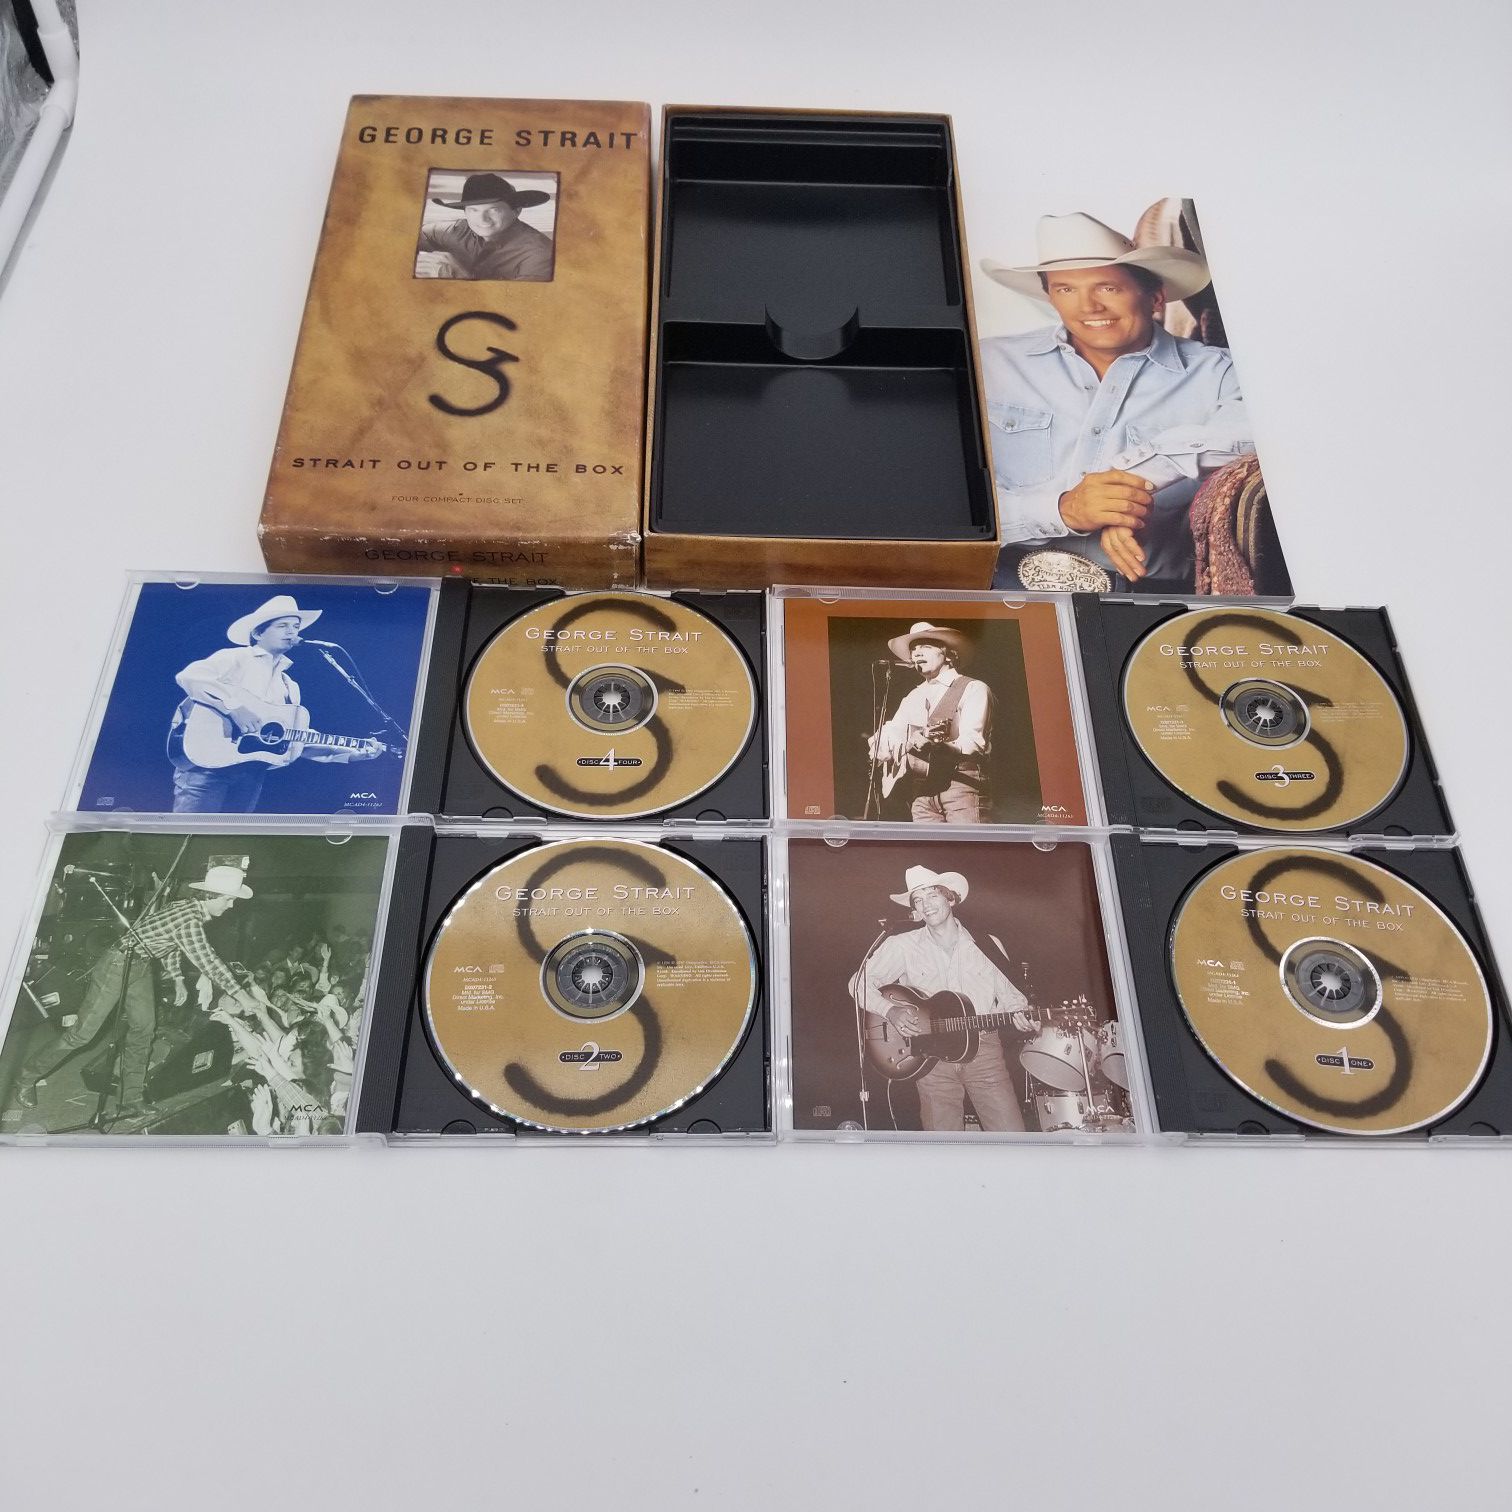 George Strait Strait Out of The Box 4 CD Box Set